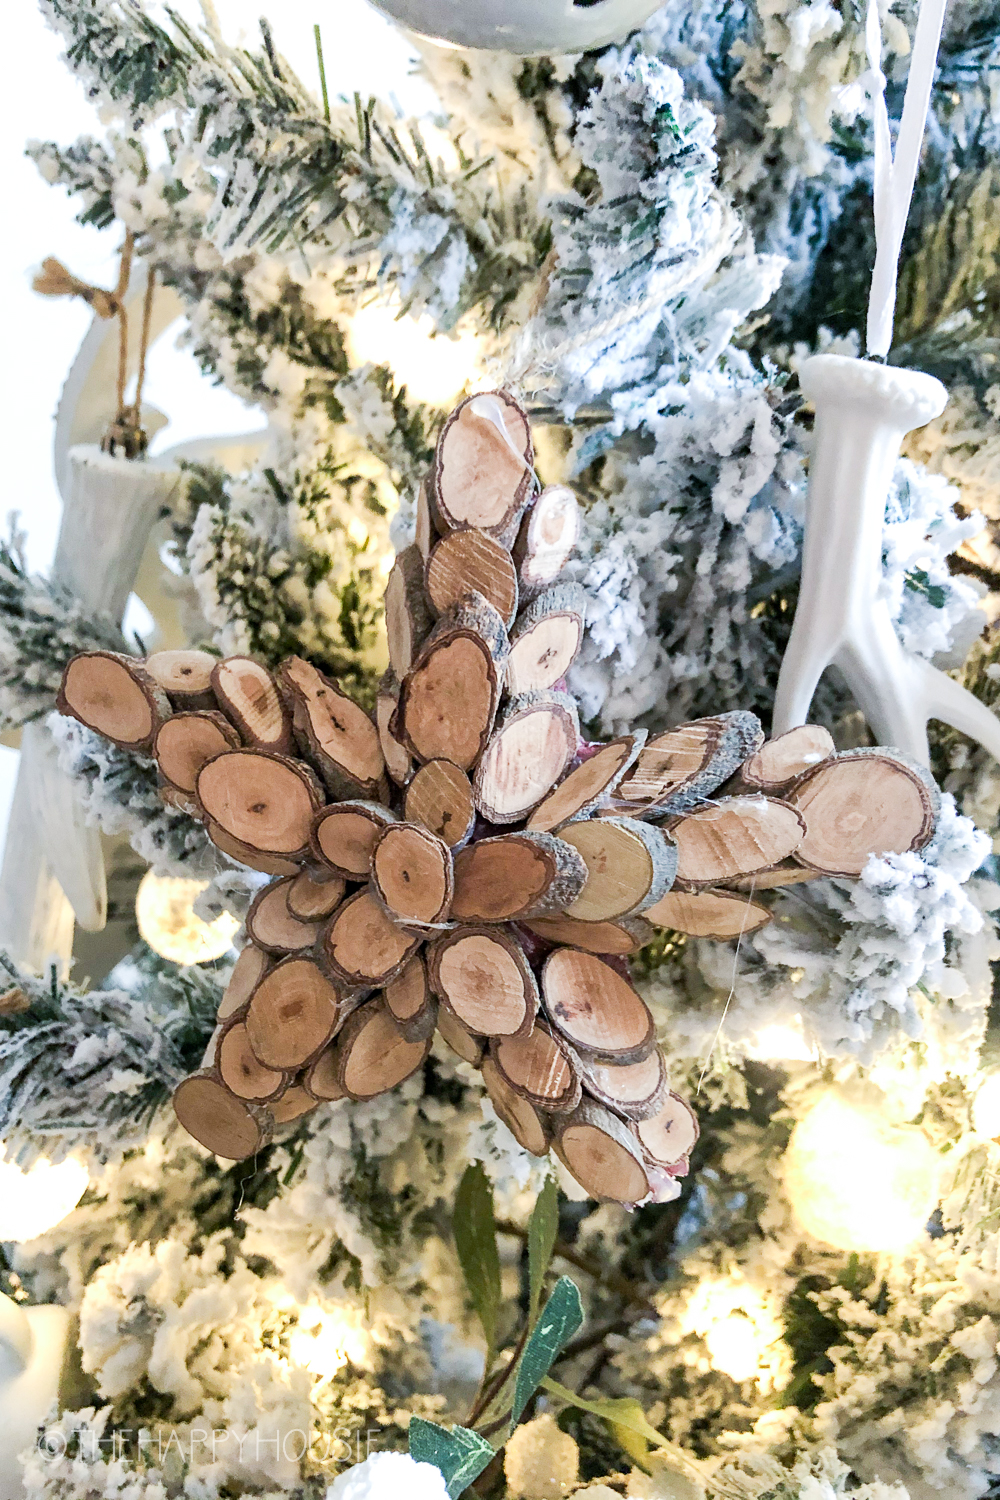 A star made out of wood chips is on the tree.